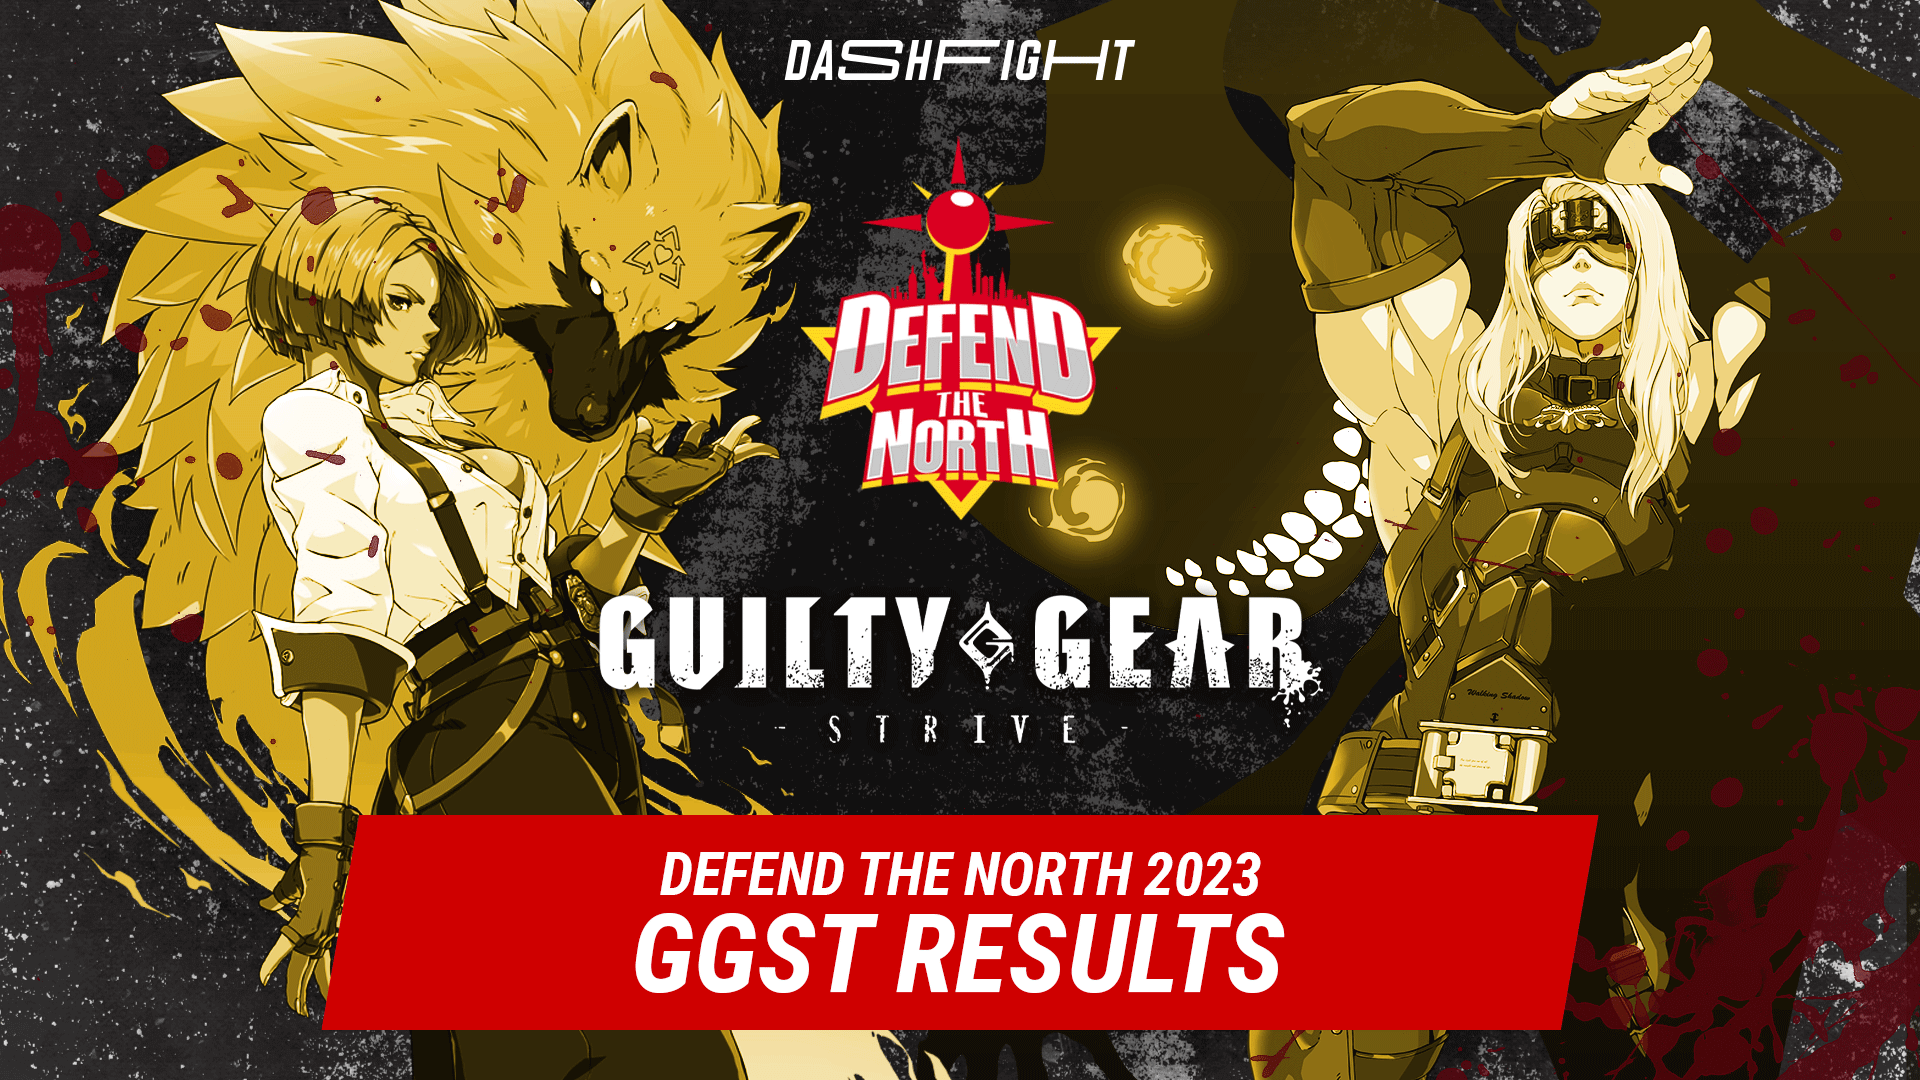 GG Strive at Defend The North 2023: It’s Not Your Street Fighter!